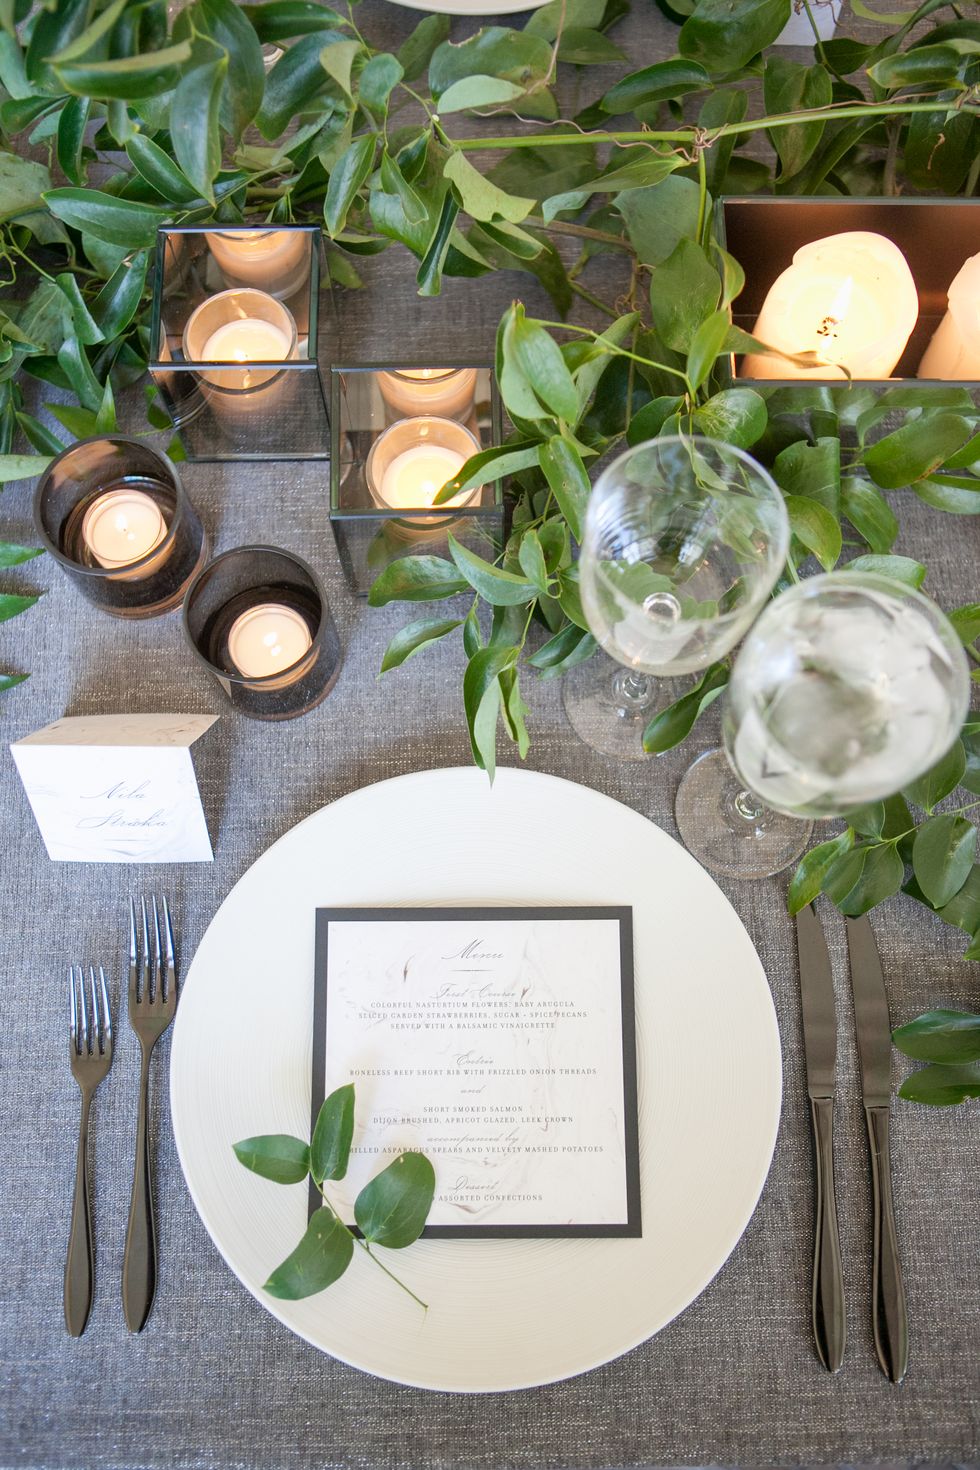 <p><a href="http://www.paperzest.com/" target="_blank" tabindex="-1">Paperzest</a> created the marble-themed menus, which rested on top of white dinner plates that were decorated with a small sprig of greenery.</p>